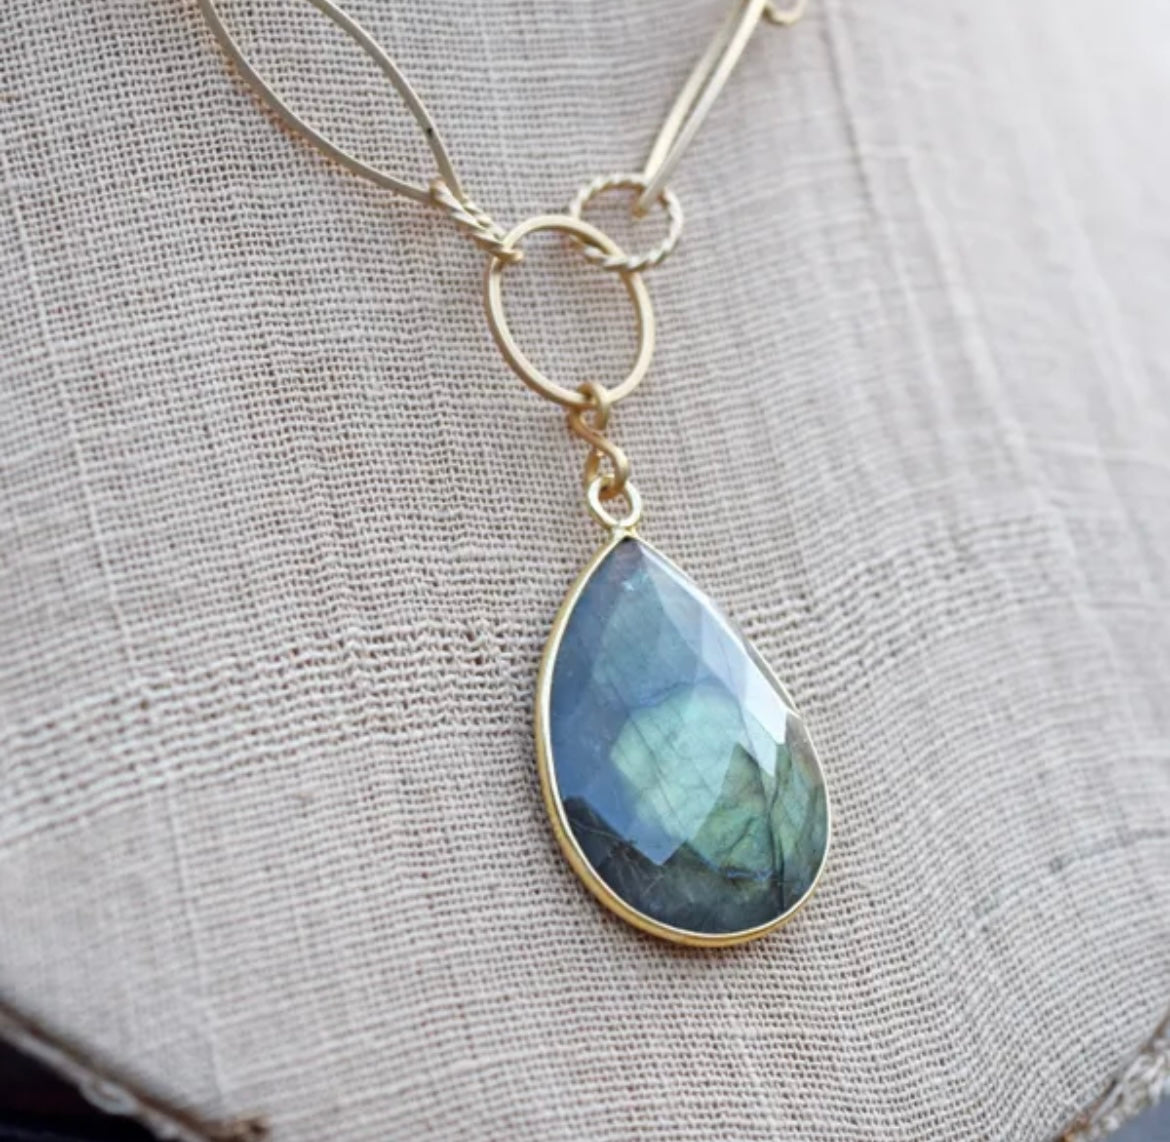 <p><span>This luxurious necklace flaunts a Labradorite gemstone framed by a Gold Vermeil bezel, delicately suspended from a shimmering Matte Gold chain with a secure Matte Gold lobster clasp enclosure; measuring approximately 17 inches in length.</span></p> <p>Hand made in the USA</p>